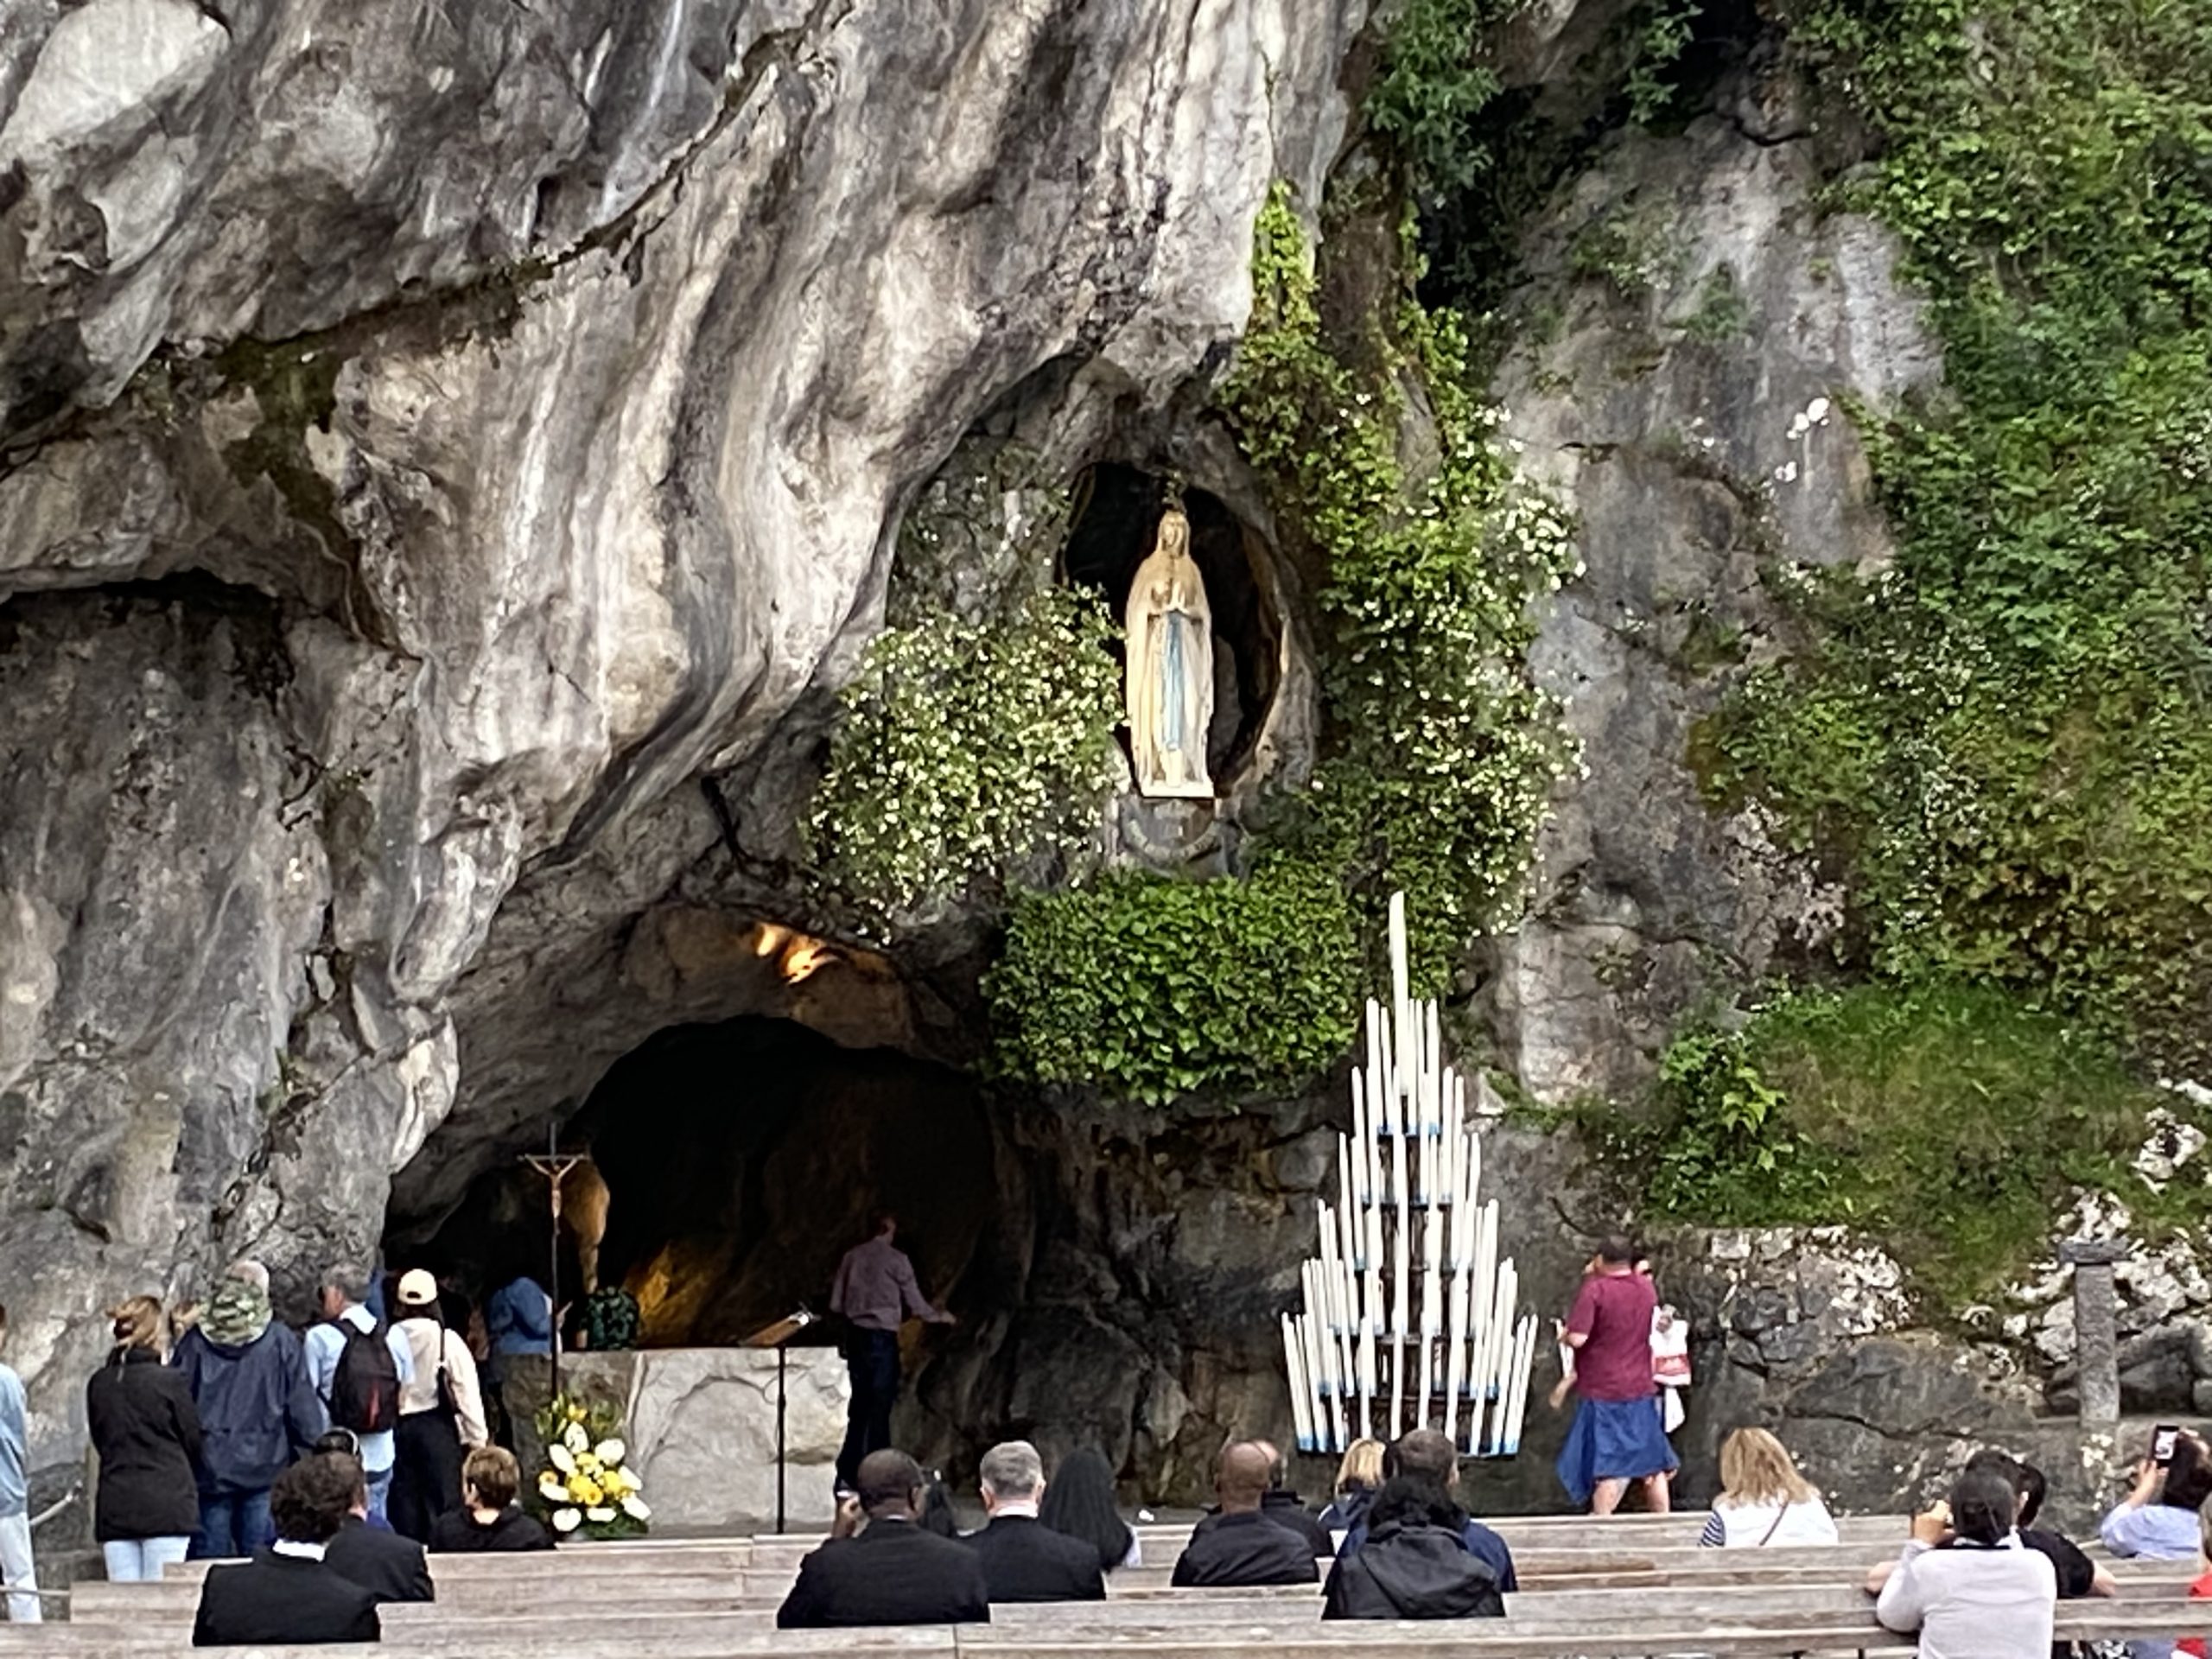 The 65th international pilgrimage to Lourdes, led by Grand Master Fra ...